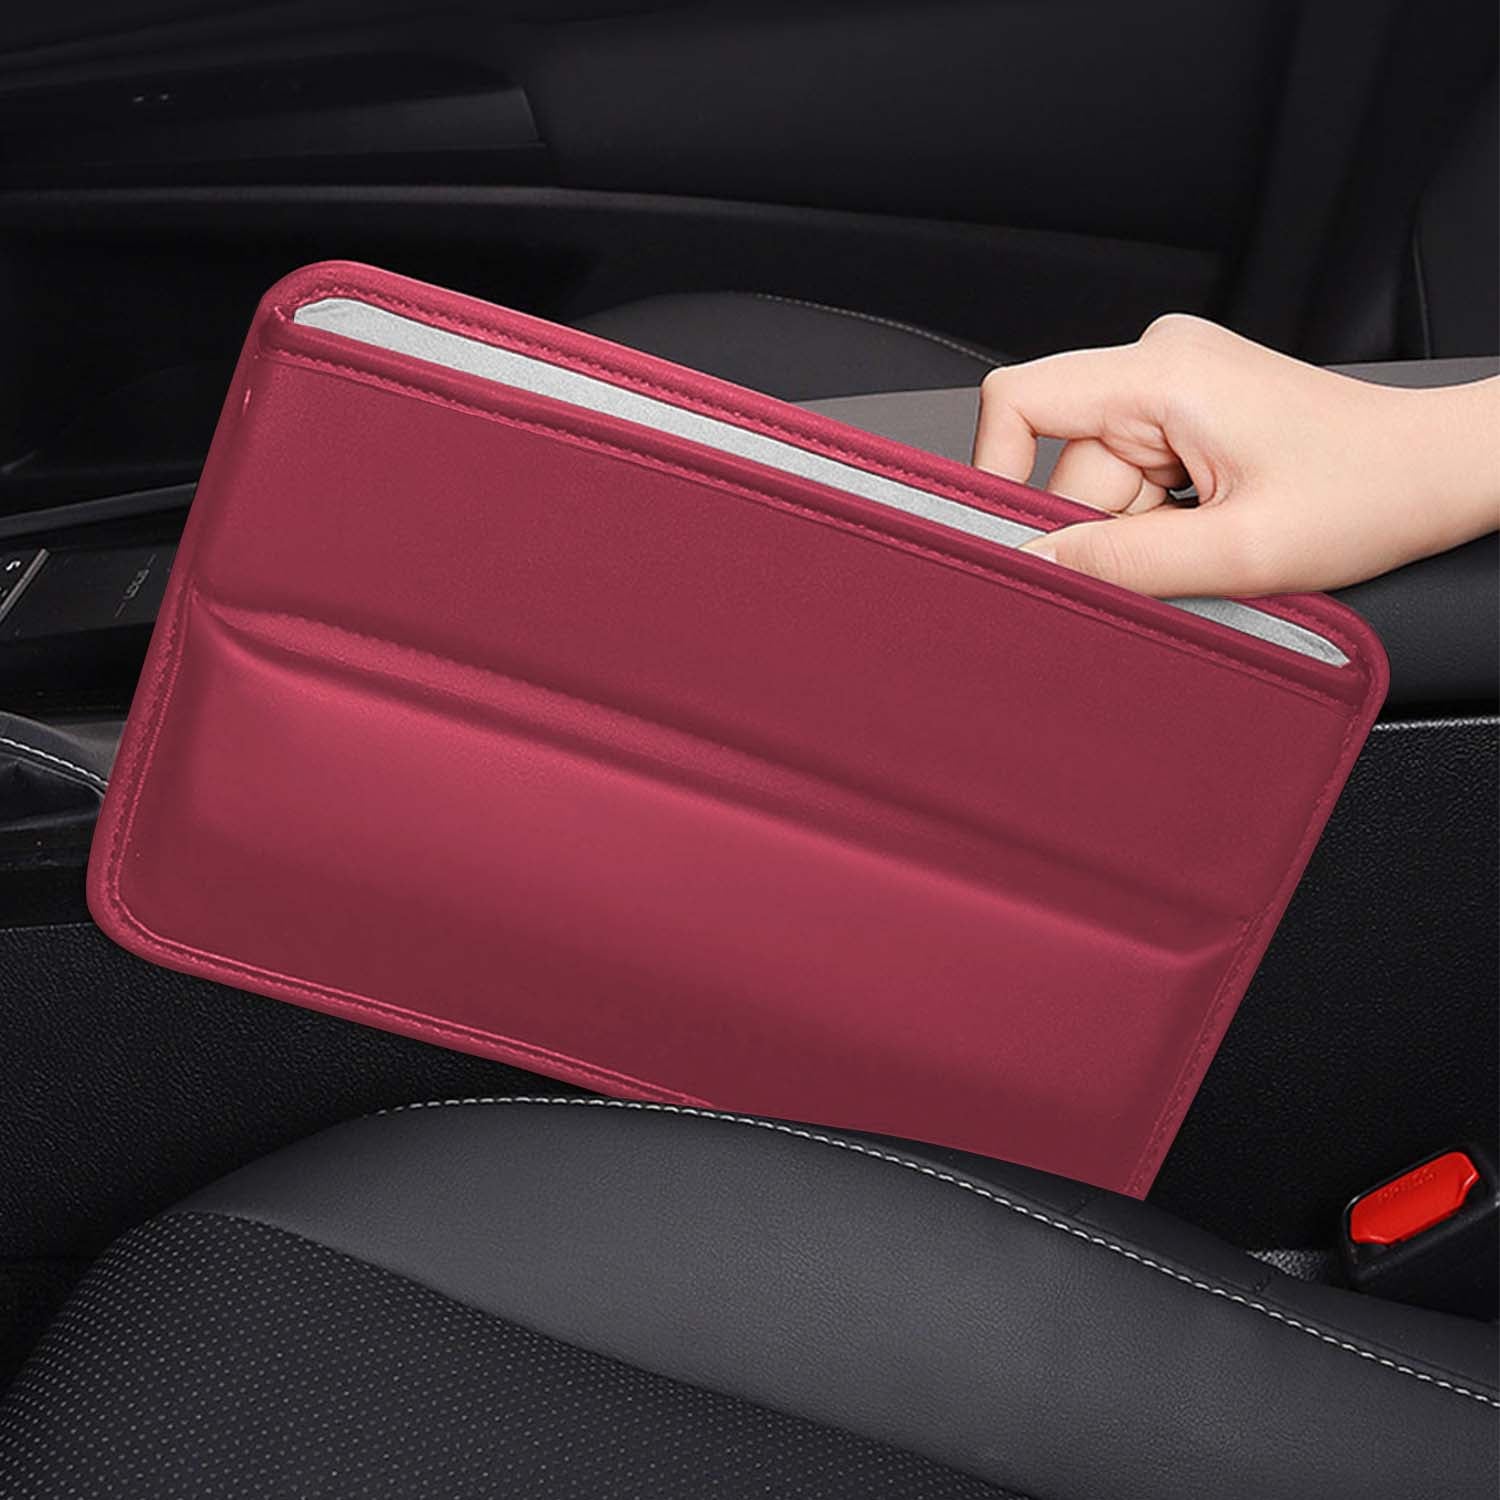 Delicate Leather Car Seat Gap Filler Organizer, Custom Fir For Your Cars, Multifunctional PU Leather Console Side Pocket Organizer for Cellphones, Cards, Wallets, Keys - Delicate Leather